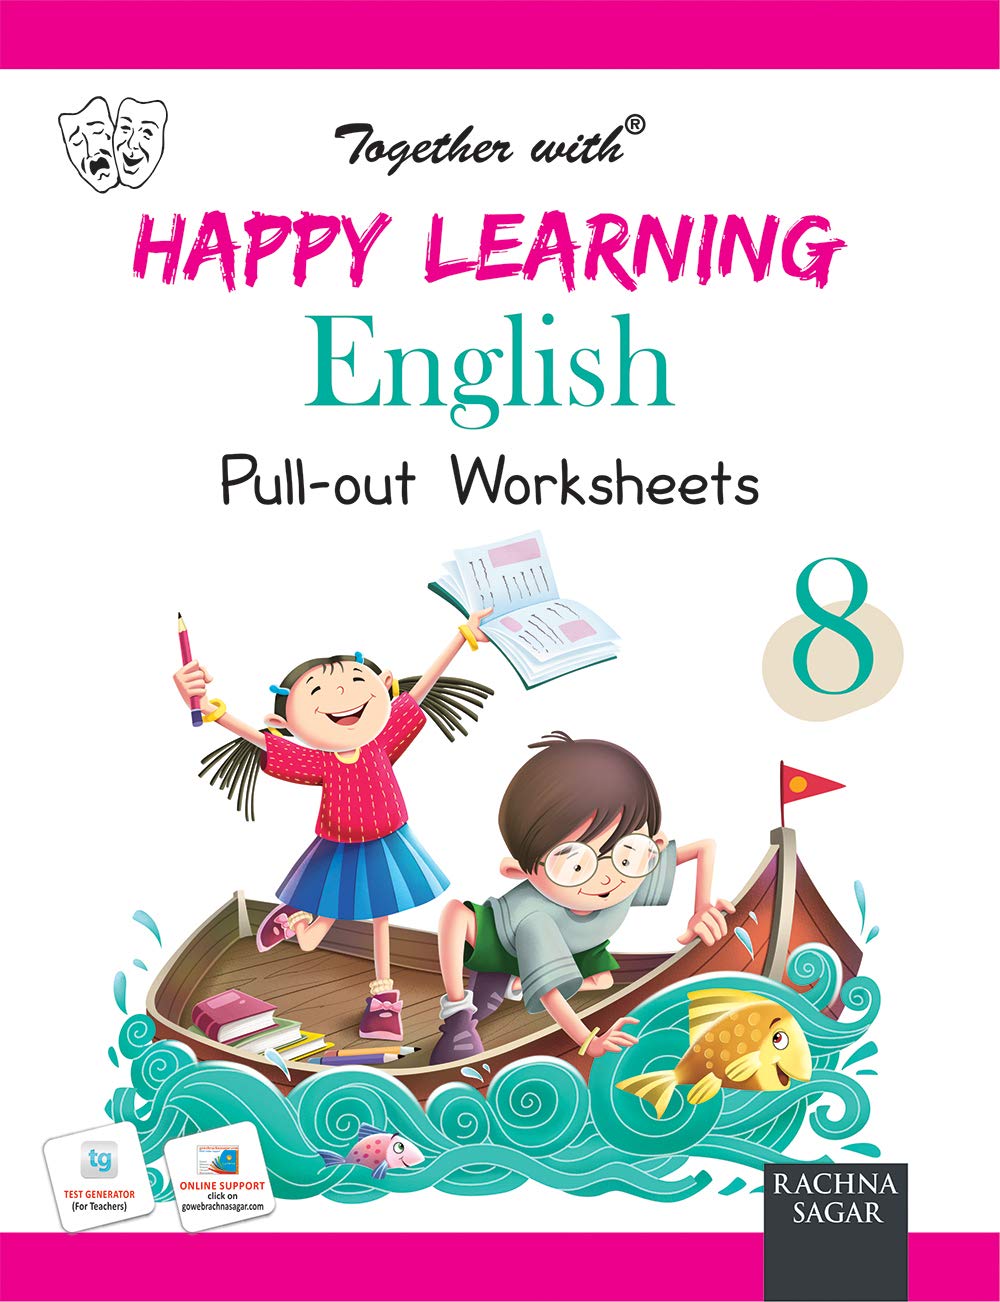 urbanbae-together-with-happy-learning-pullout-worksheets-english-for